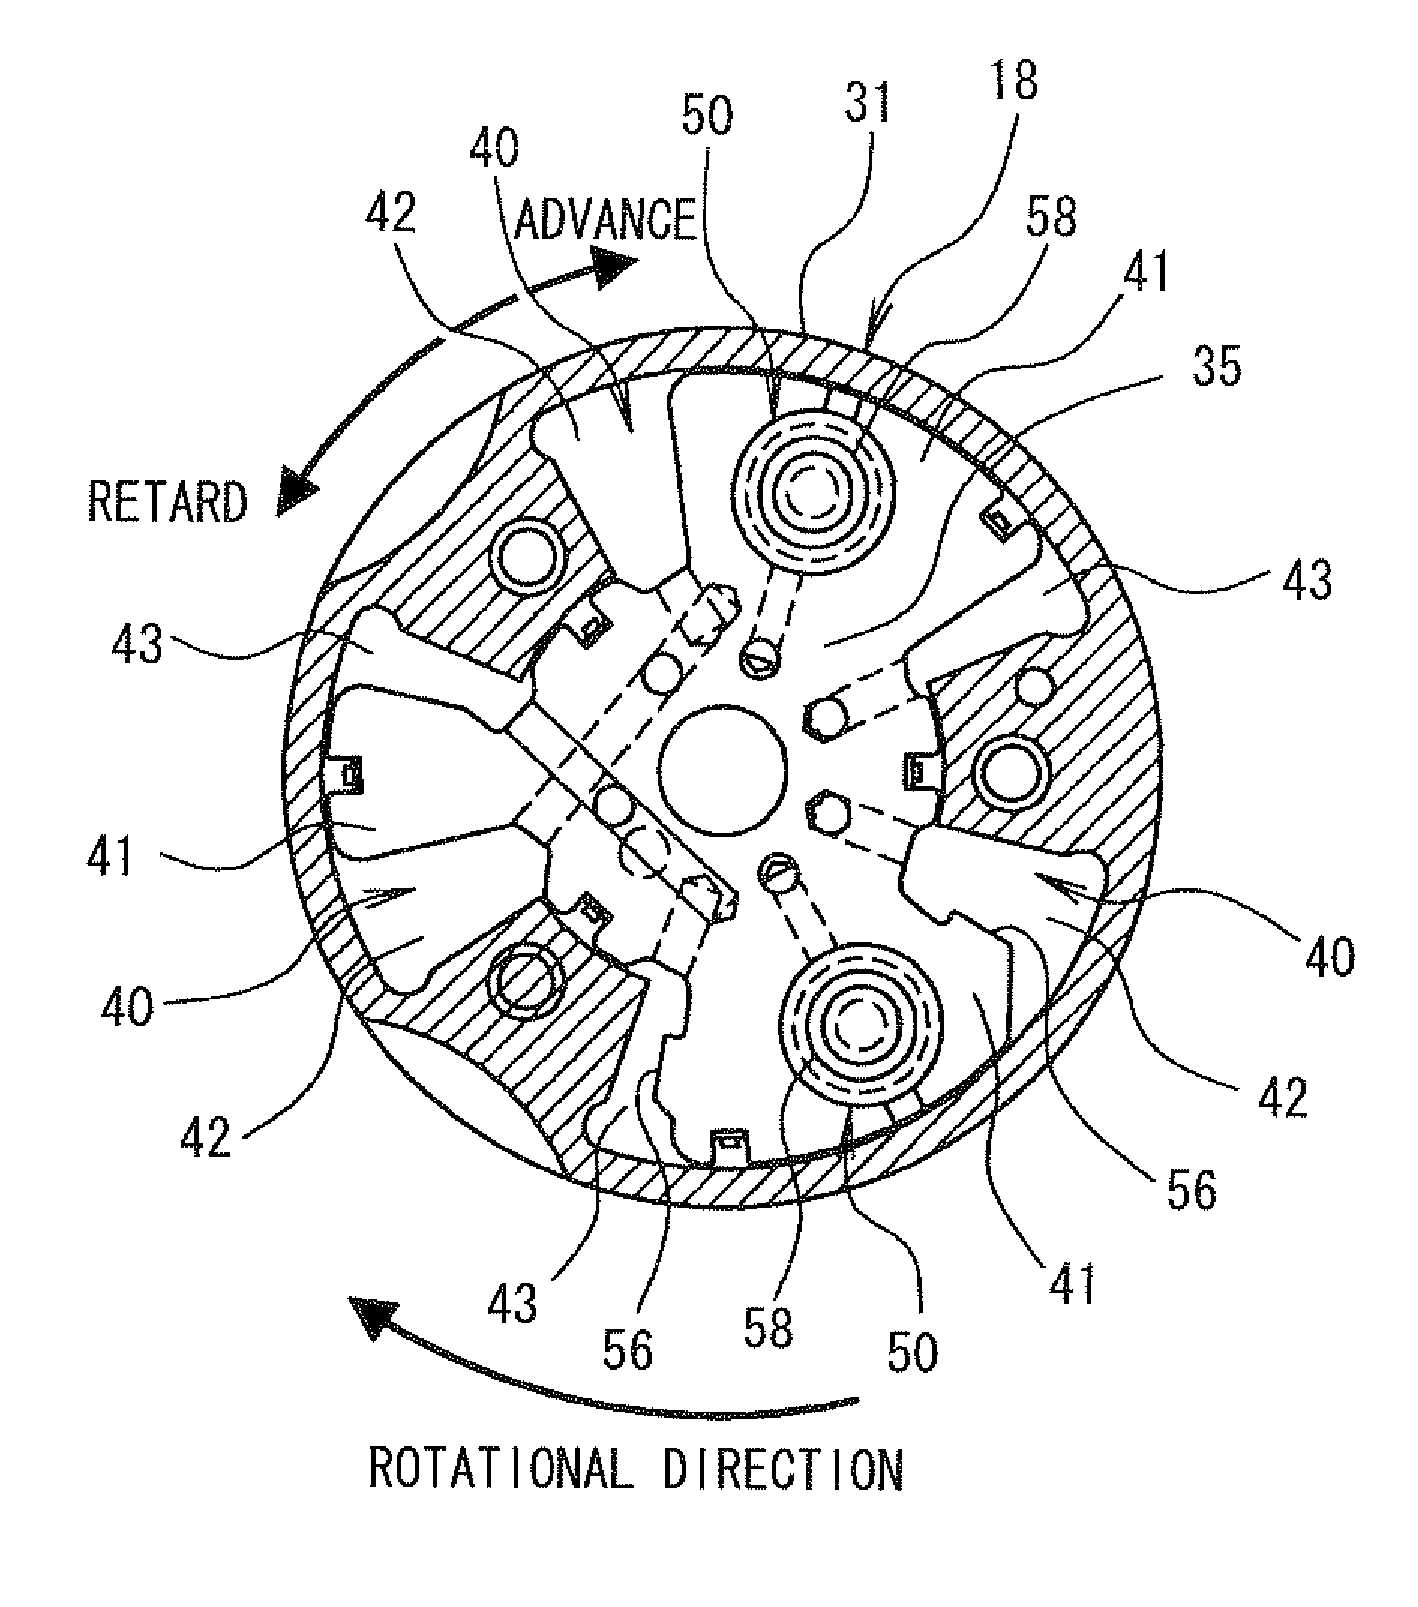 Variable valve timing control apparatus for internal combustion engine